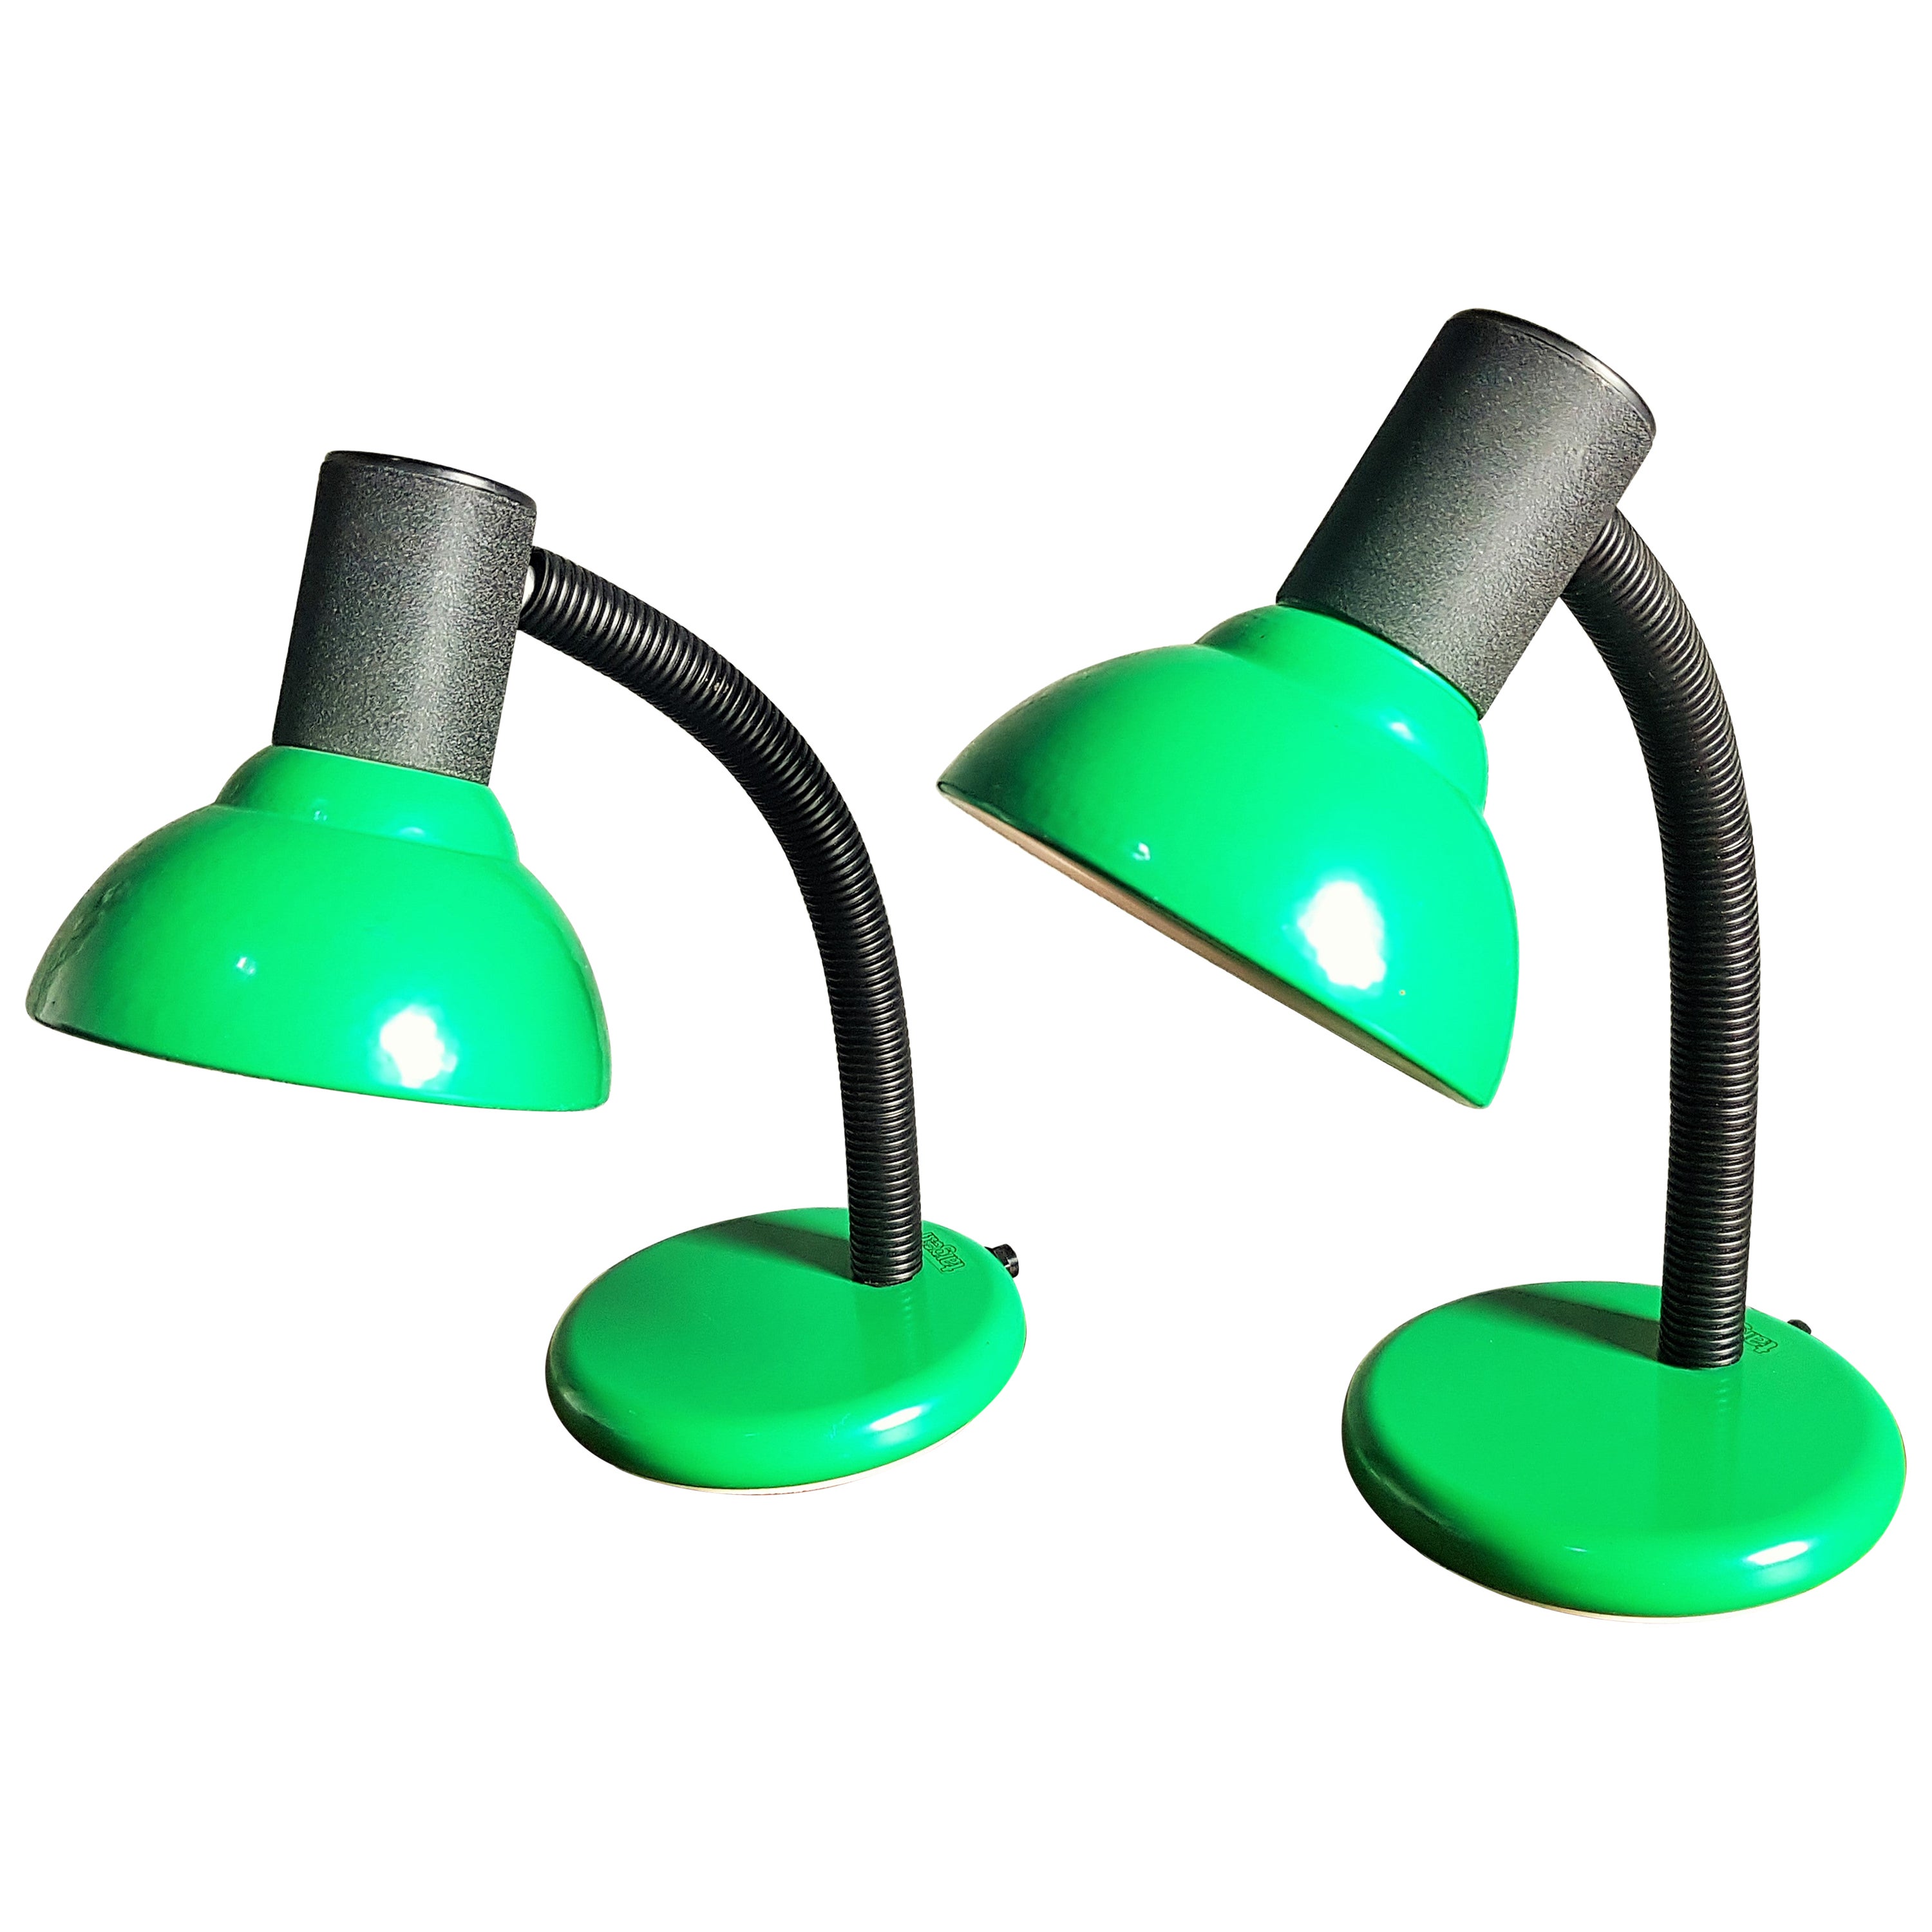 Post-Modern Midcentury Pair of Table Desk Lamps, Targetti, Italy, 1982 For Sale